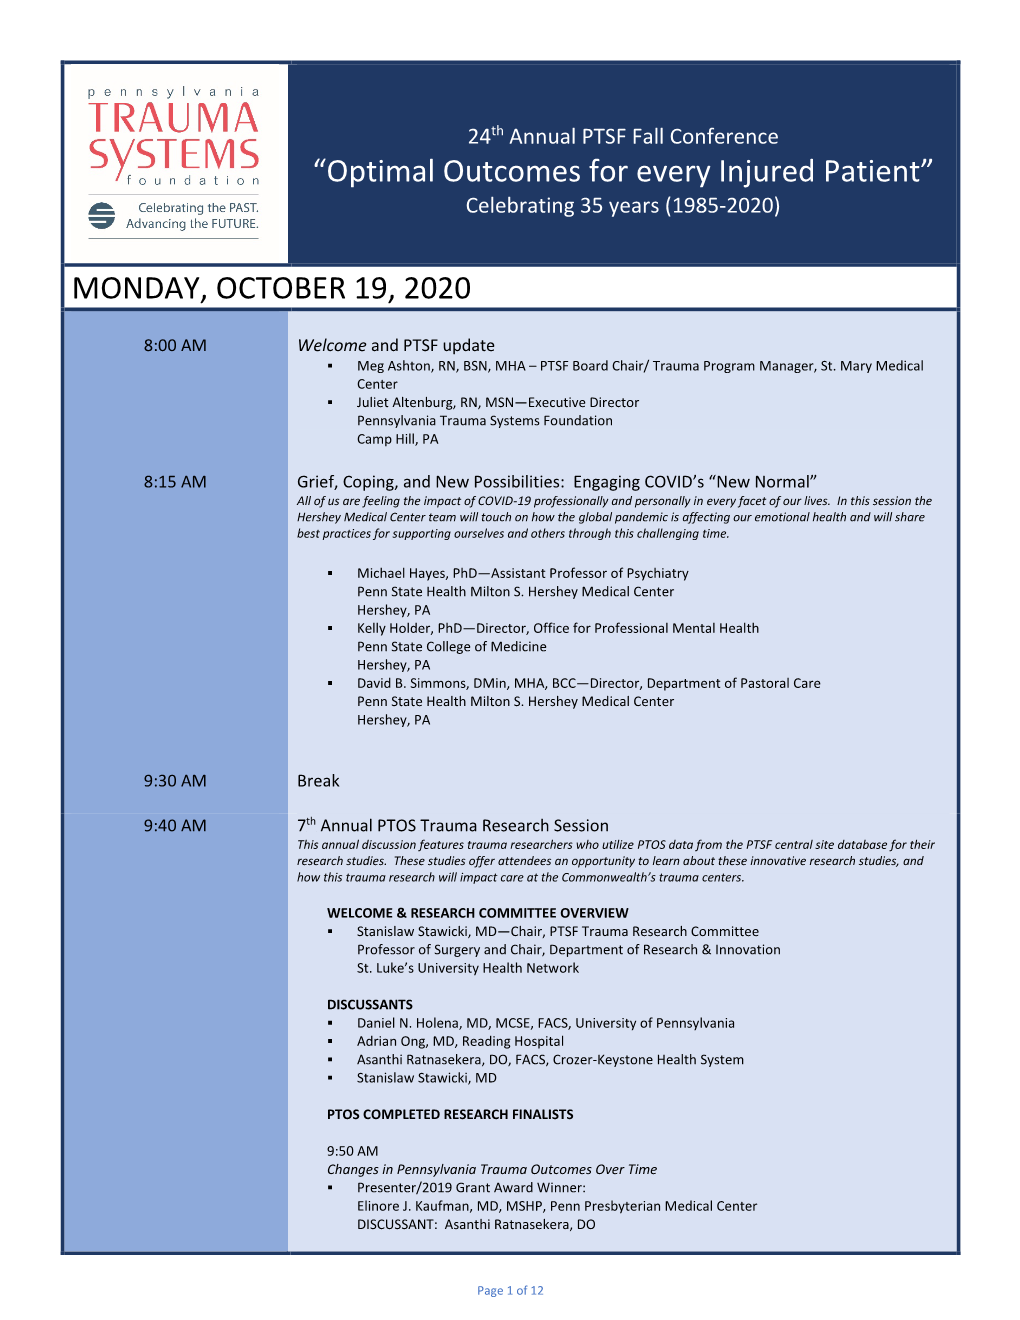 Optimal Outcomes for Every Injured Patient” Celebrating 35 Years (1985-2020)